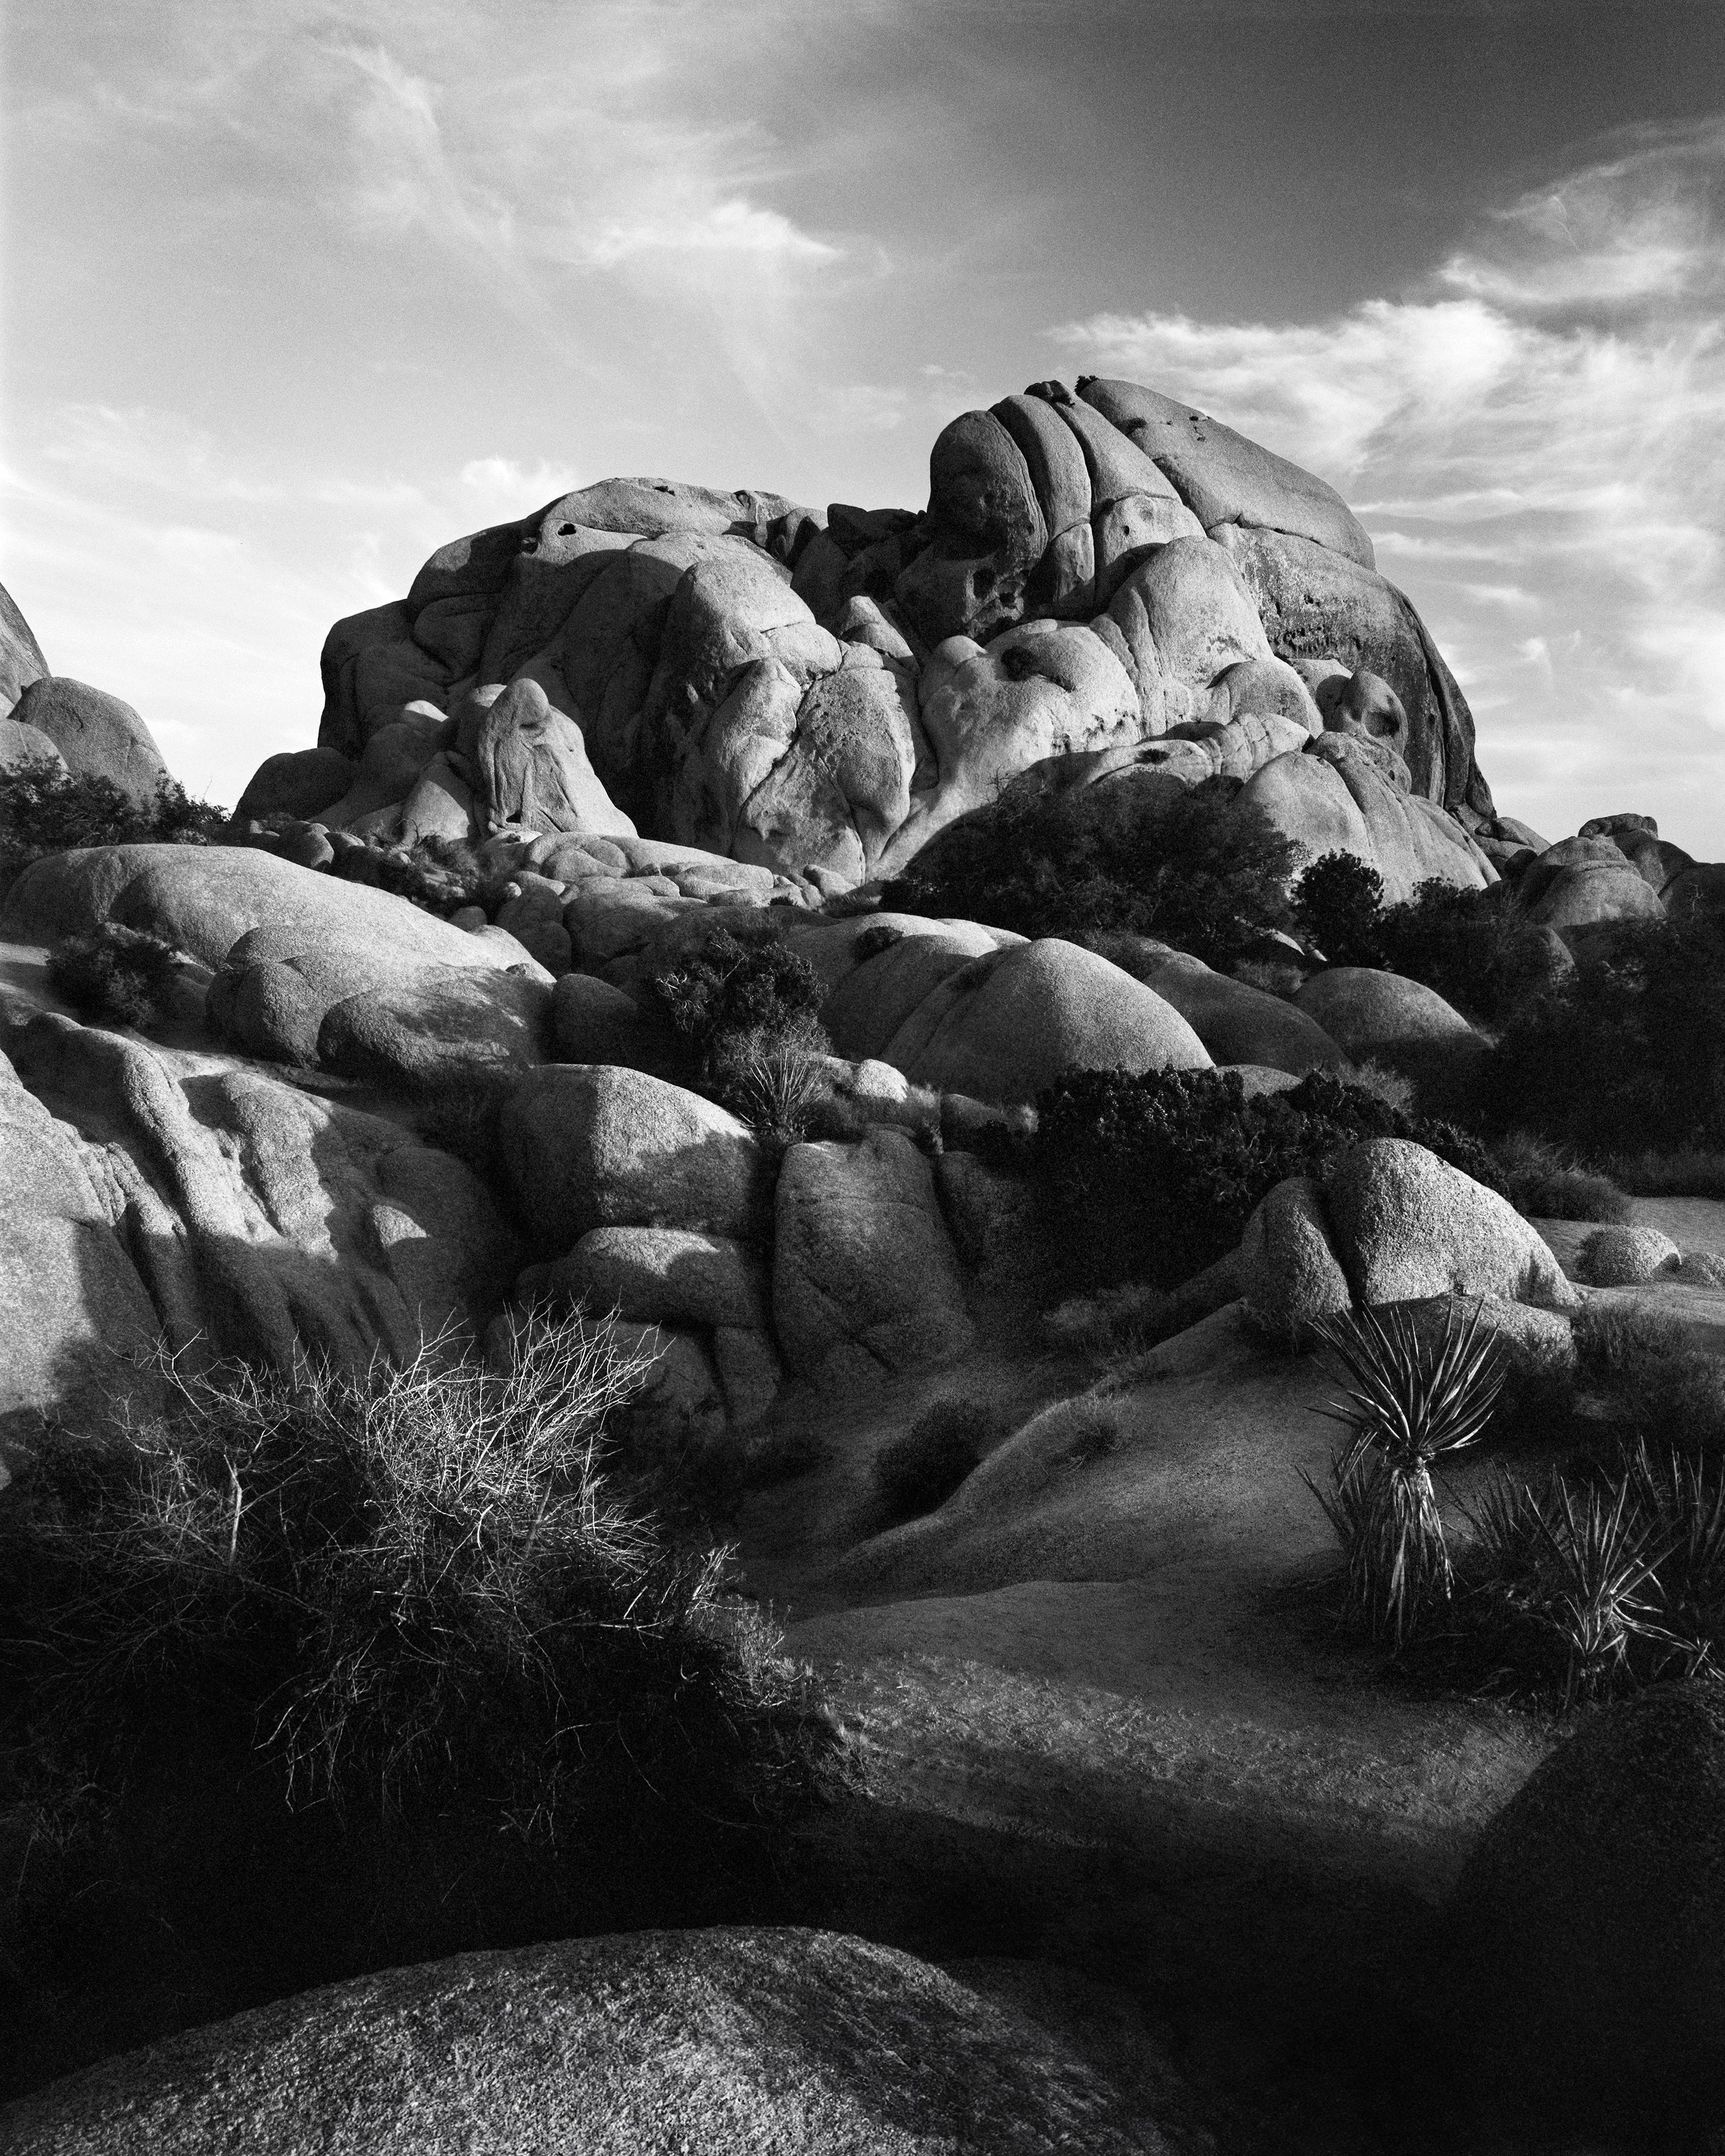 Black and White Photograph Ugne Pouwell - Jumbo Rocks California #2 - roches désertiques analogiques noires et blanches 